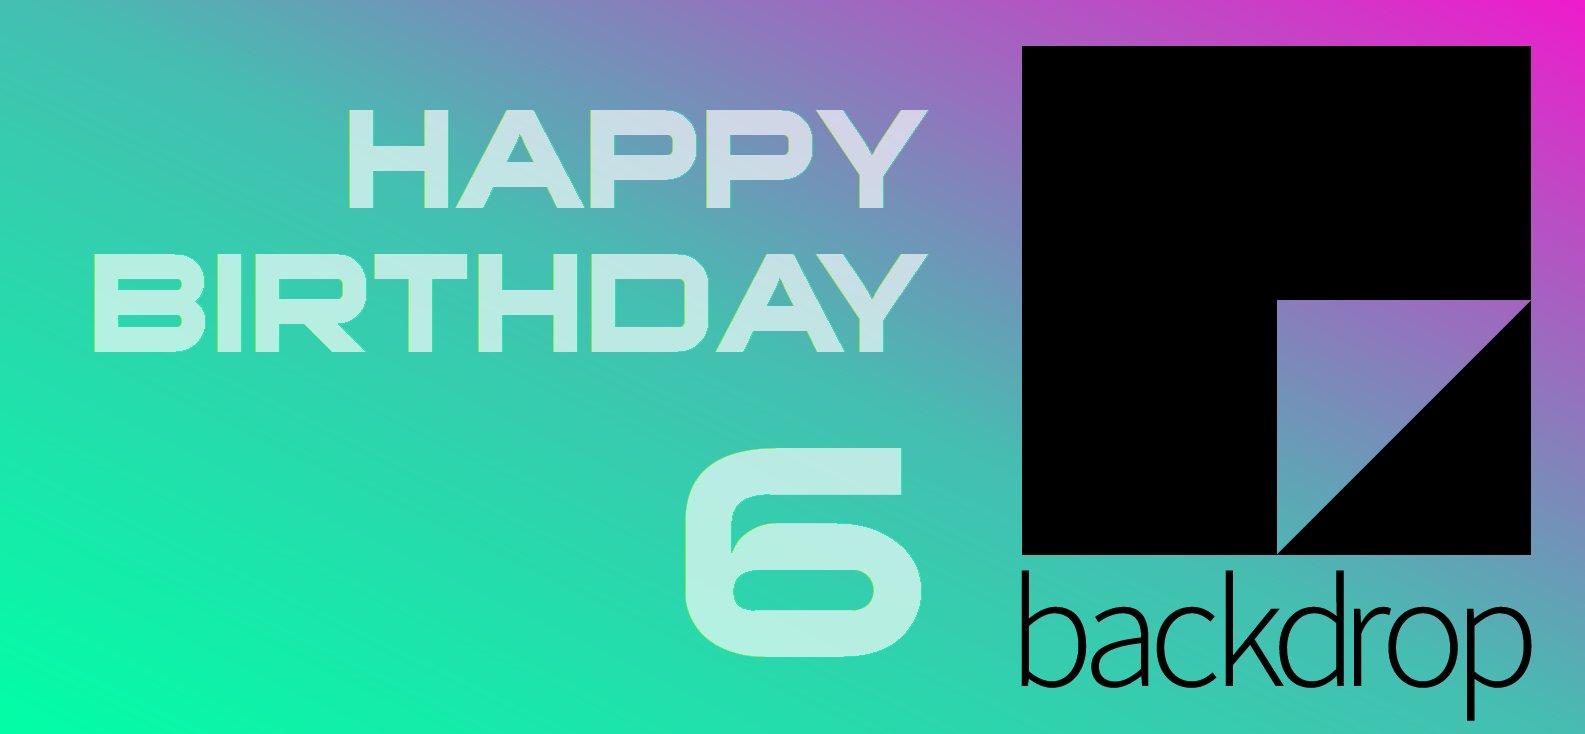 On Backdrop CMS' 6th birthday version 1.18.0 has been released. Happy Birthday, Backdrop!